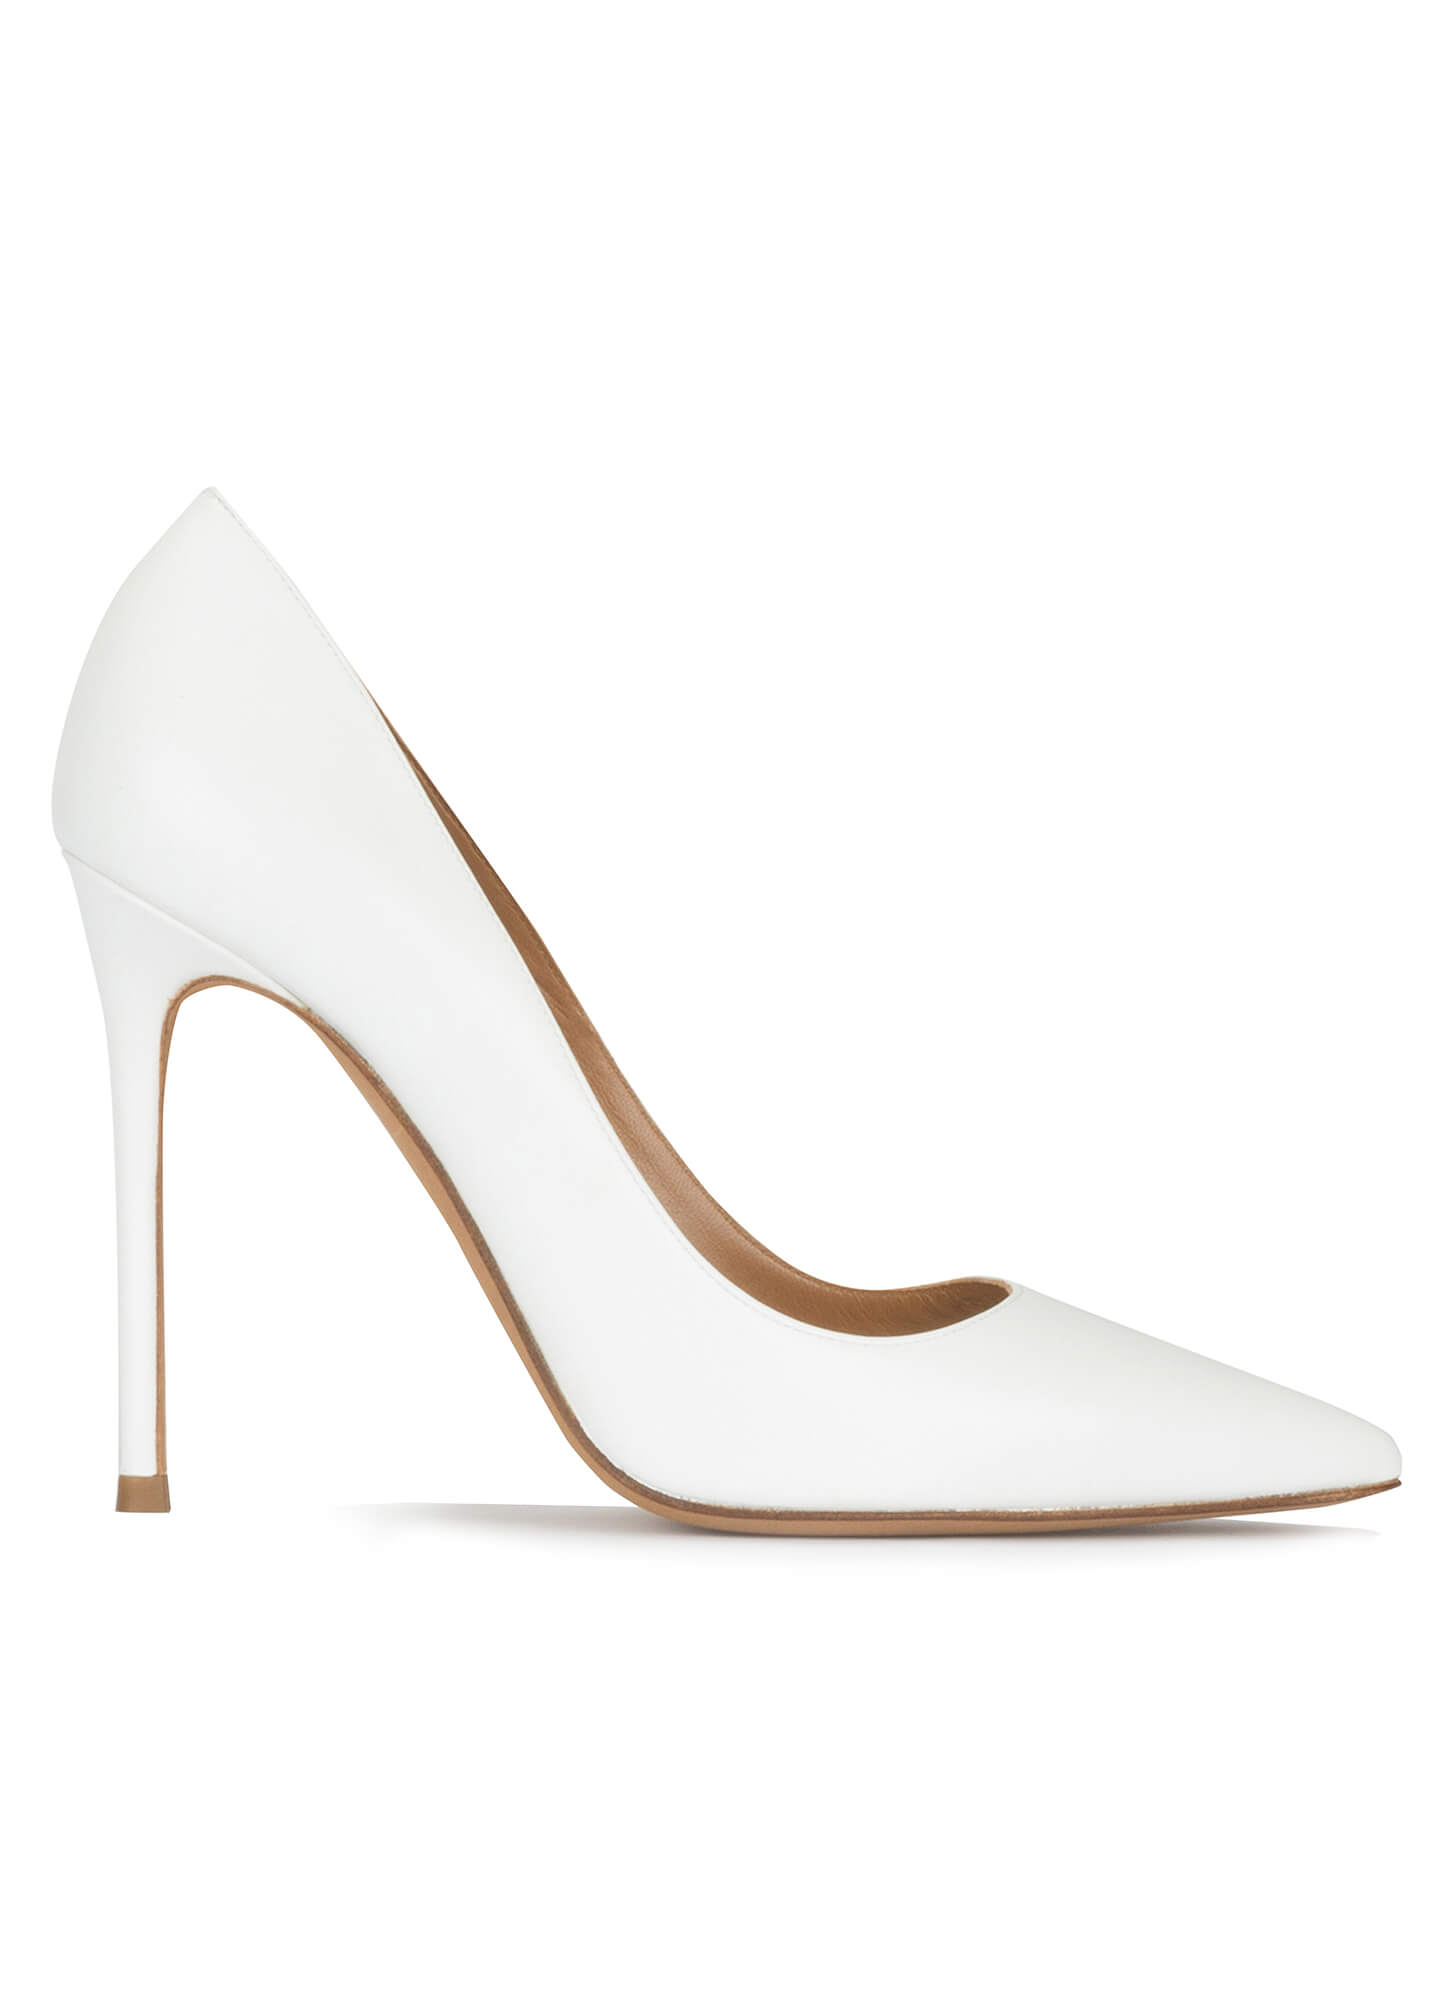 White leather high heel pointy toe 